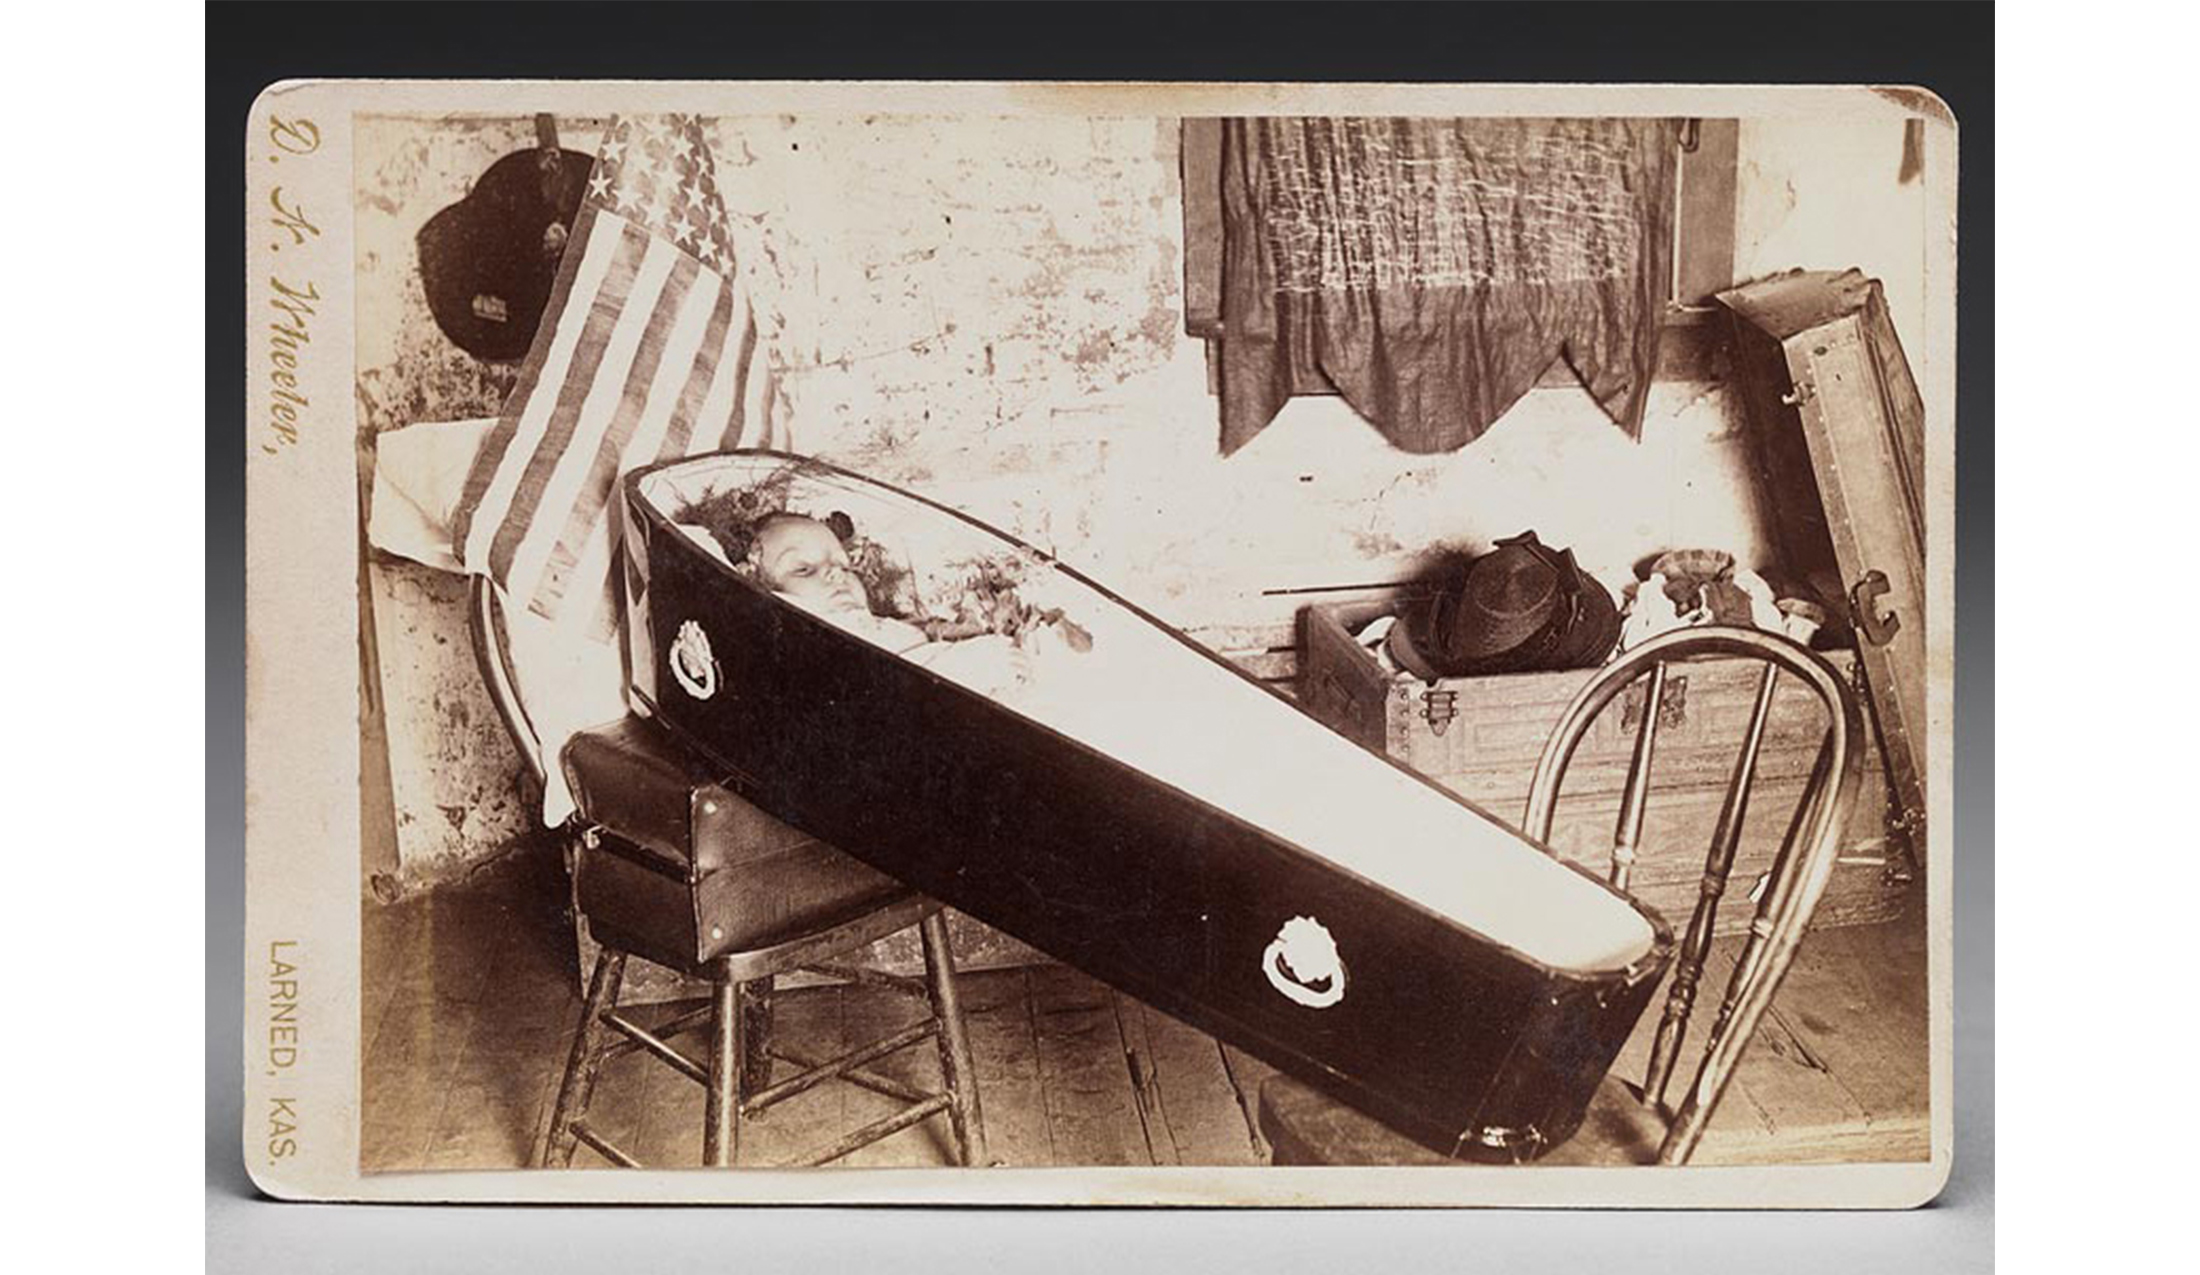 small black coffin holding a deceased dead child set on two chairs with American flag behind it and open trunk filled with children's clothing nearby, floor is unfinished wood, wall is heavily peeling whitewash, small window has translucent dark curtain over it